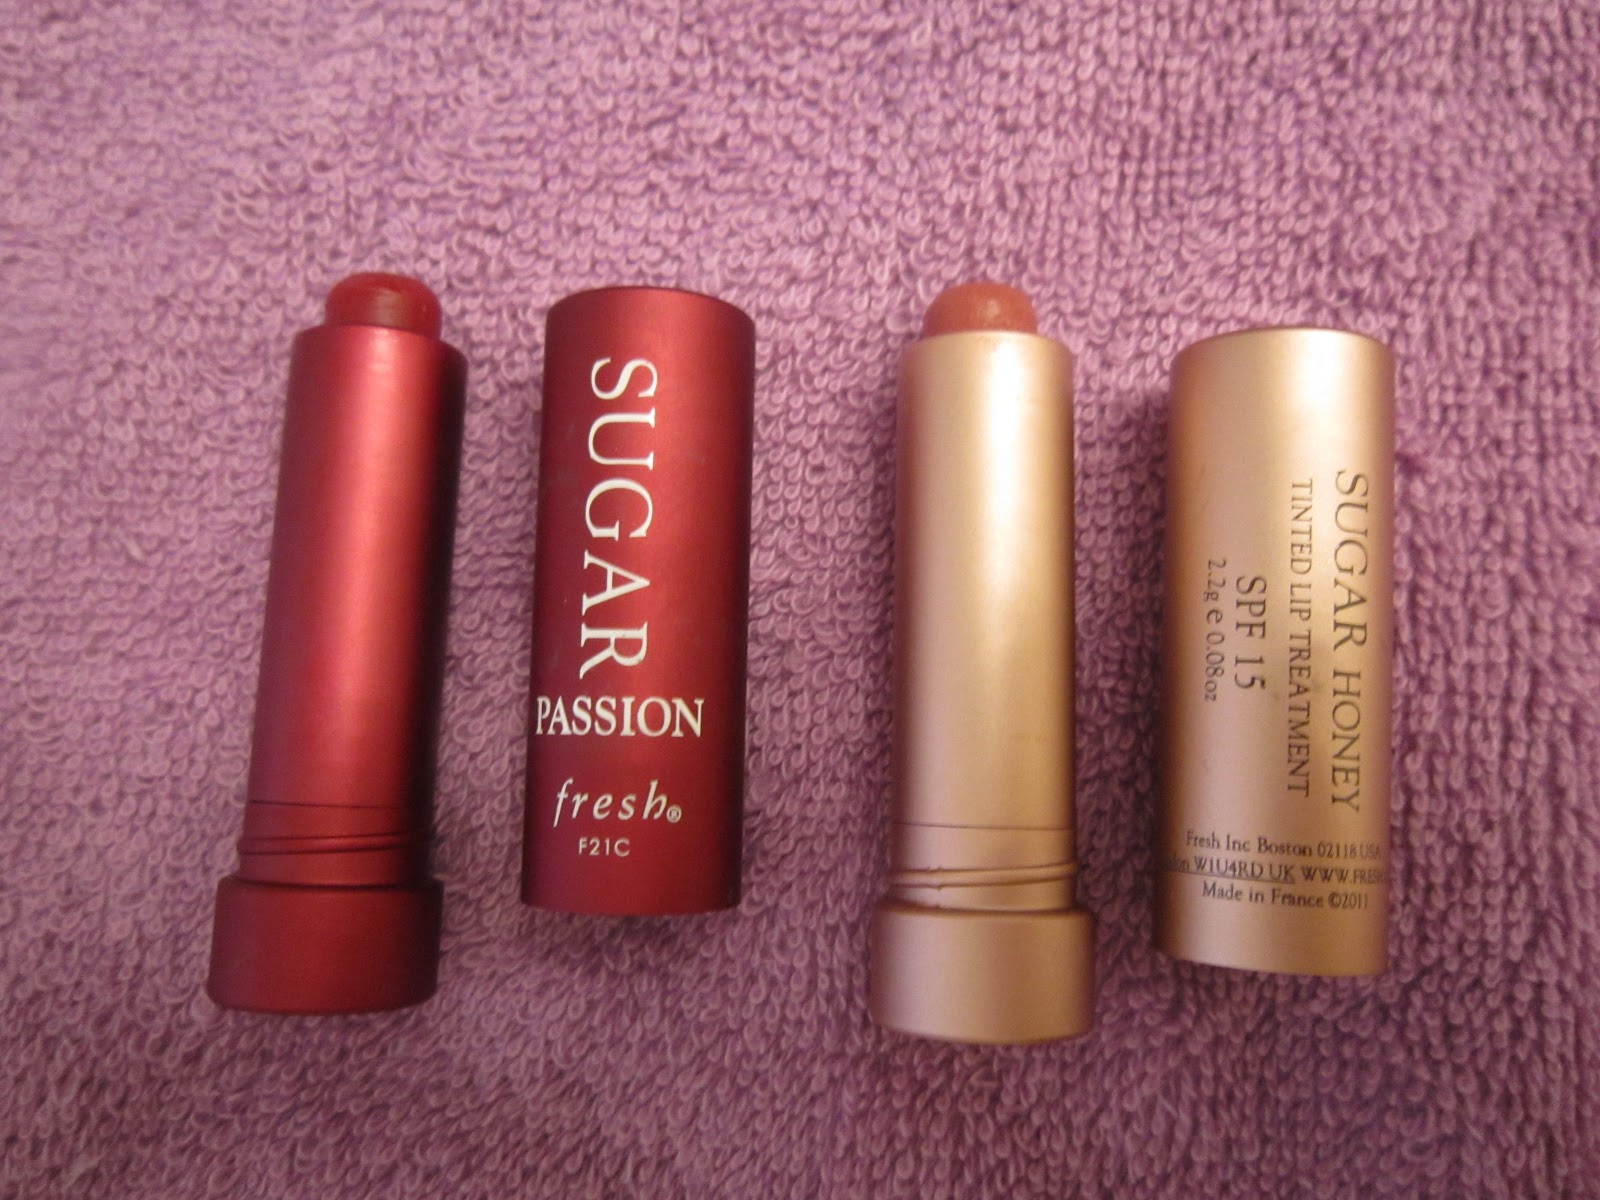 My Makeup Issues: Fresh Sugar Honey and Passion Lip Treatment - Review and  Swatches